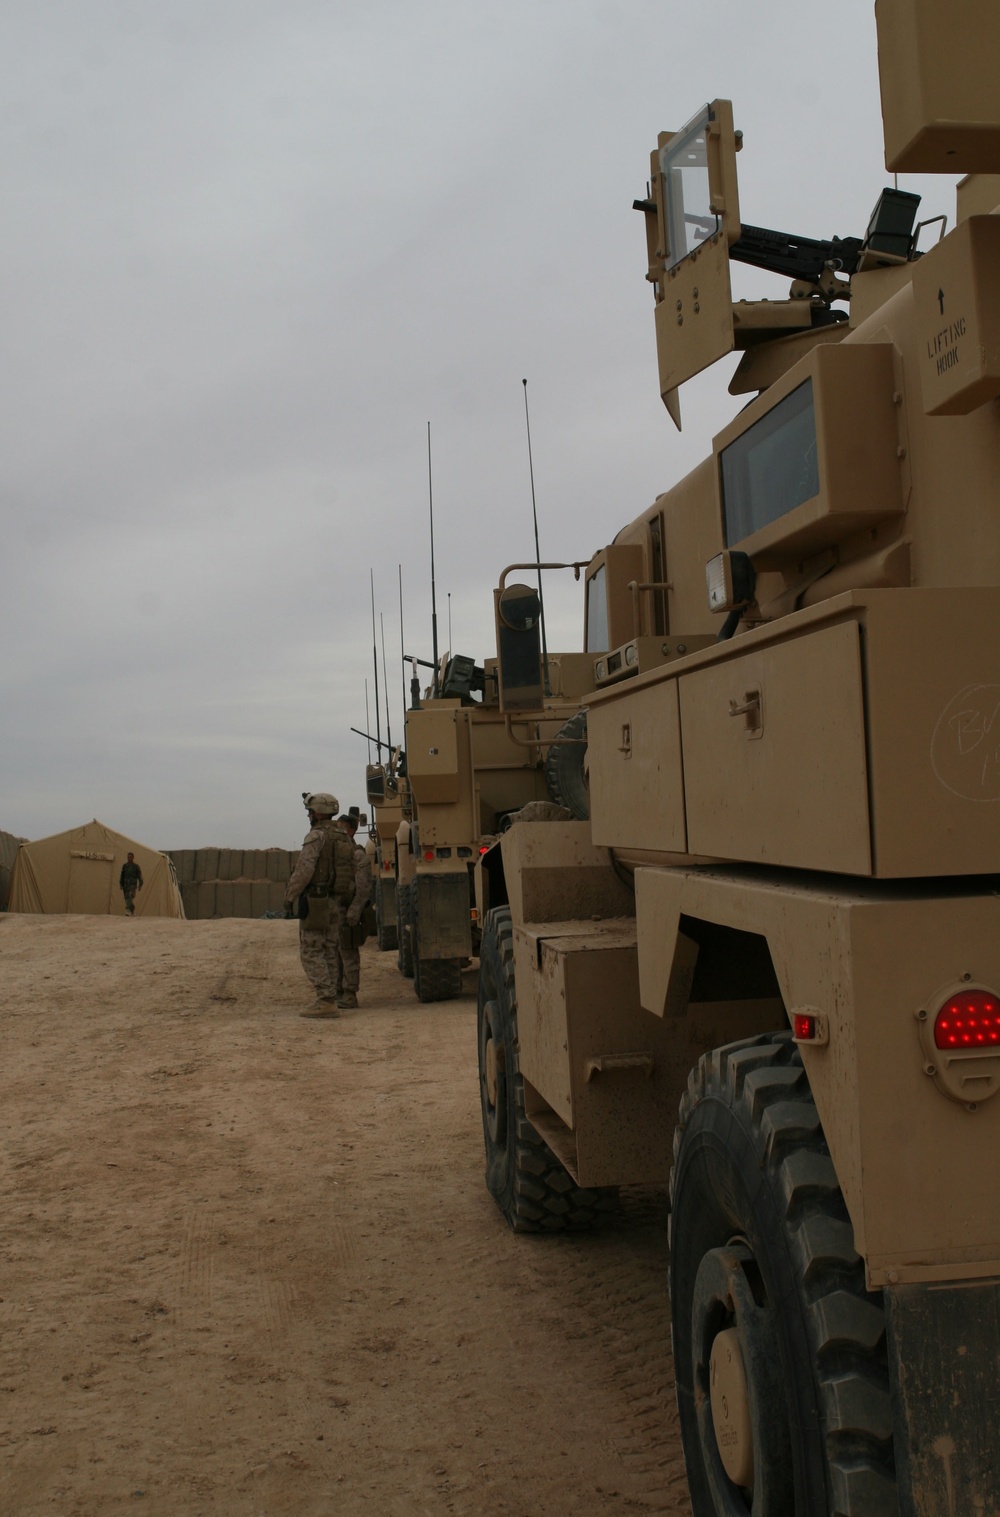 Boots hit the ground with shovels in hand; Marines arrive, fortify Observation Post Huskars